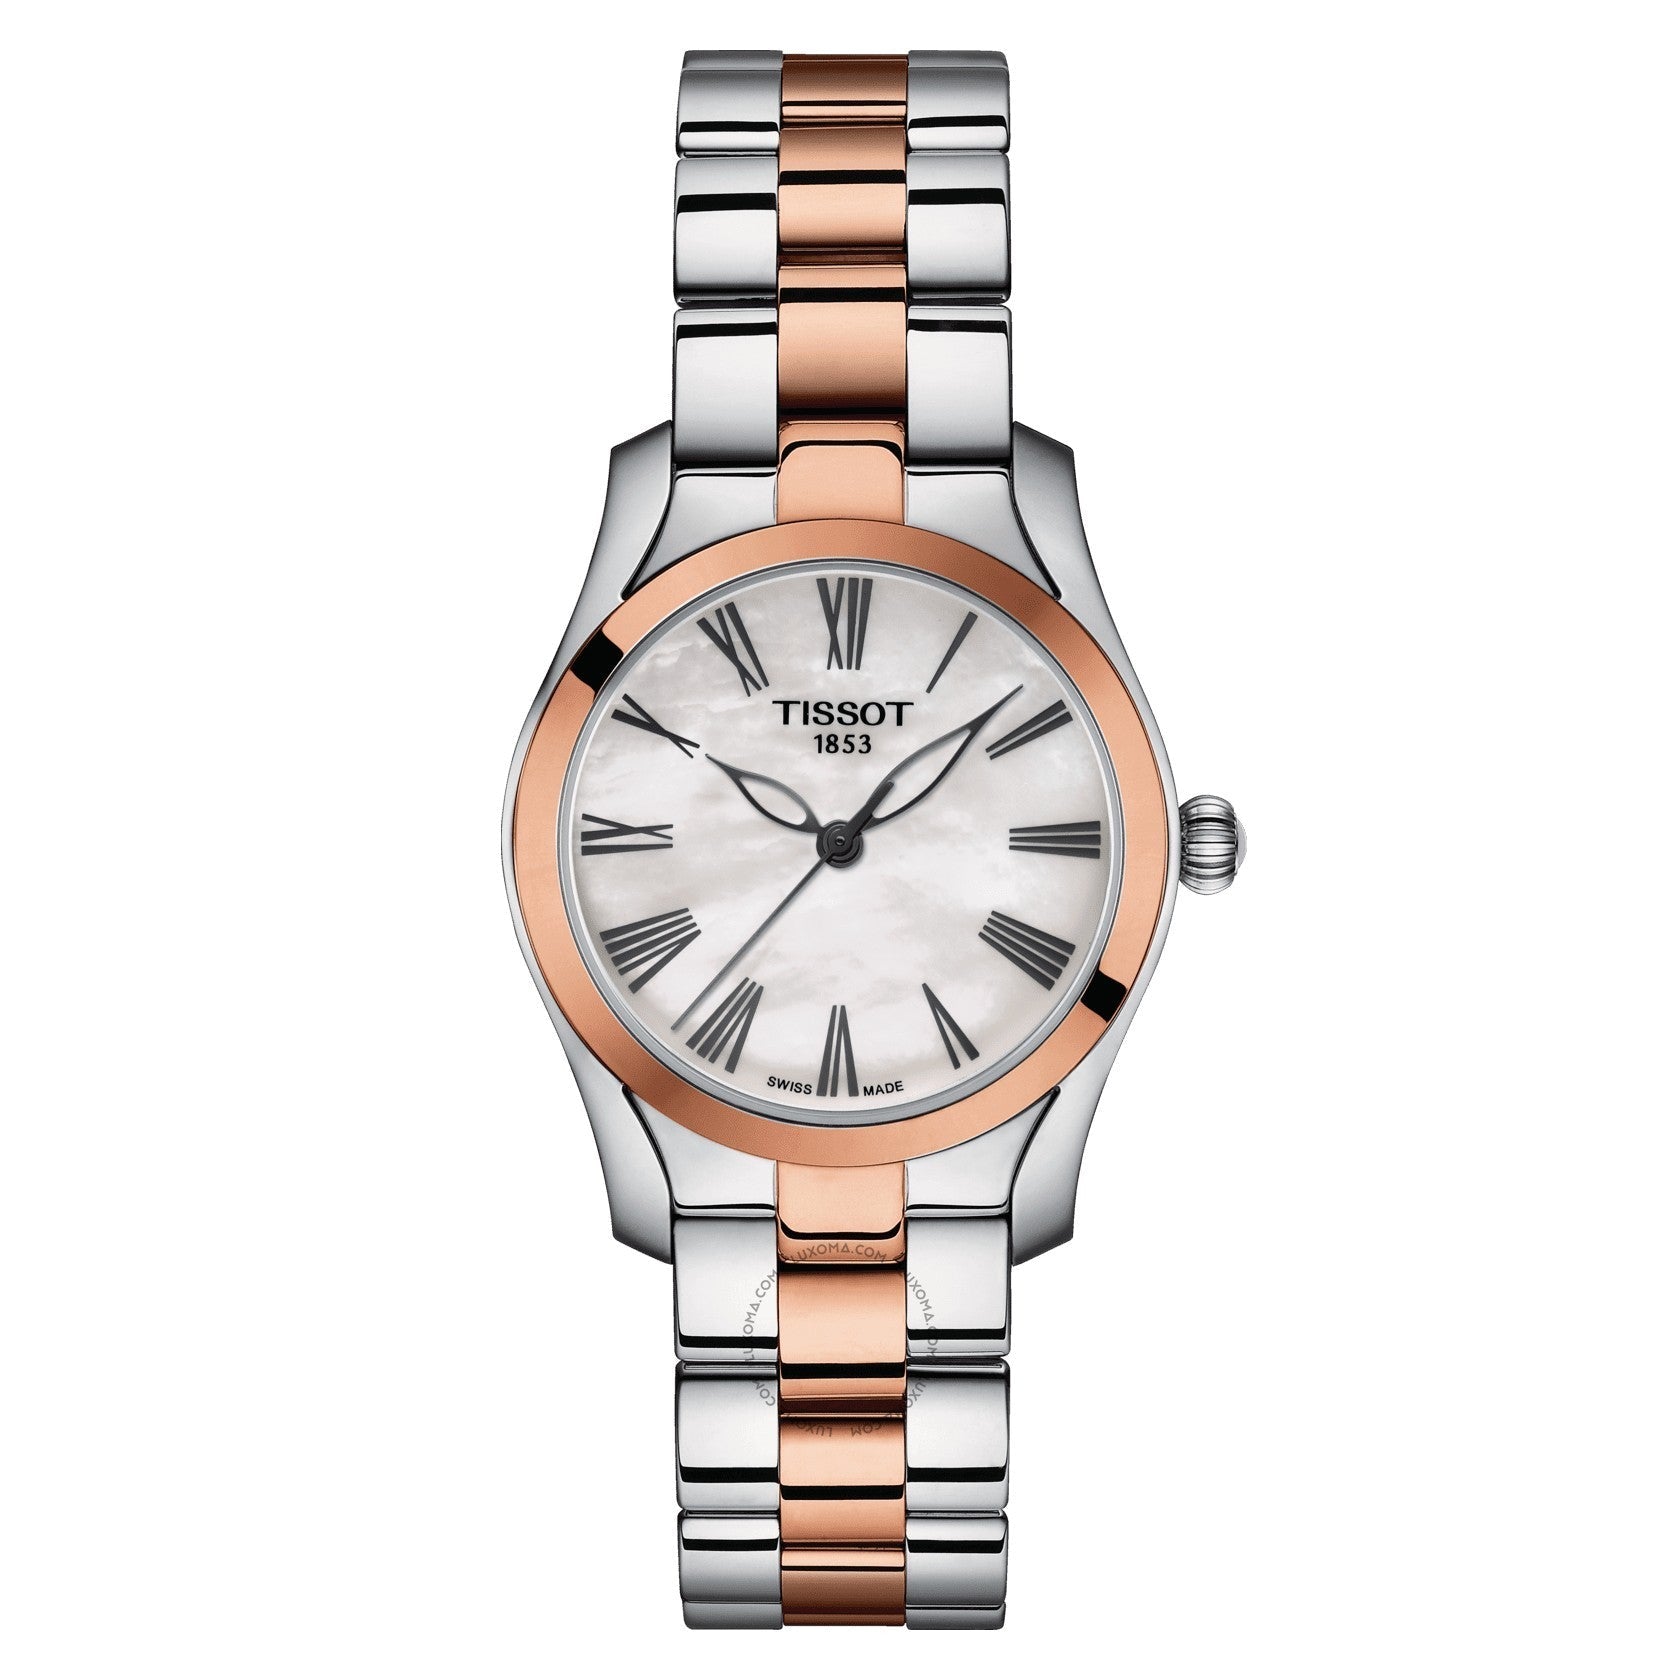 Tissot T-Lady Quartz White Mother-of-Pearl Dial Ladies Watch T112.210.22.113.01